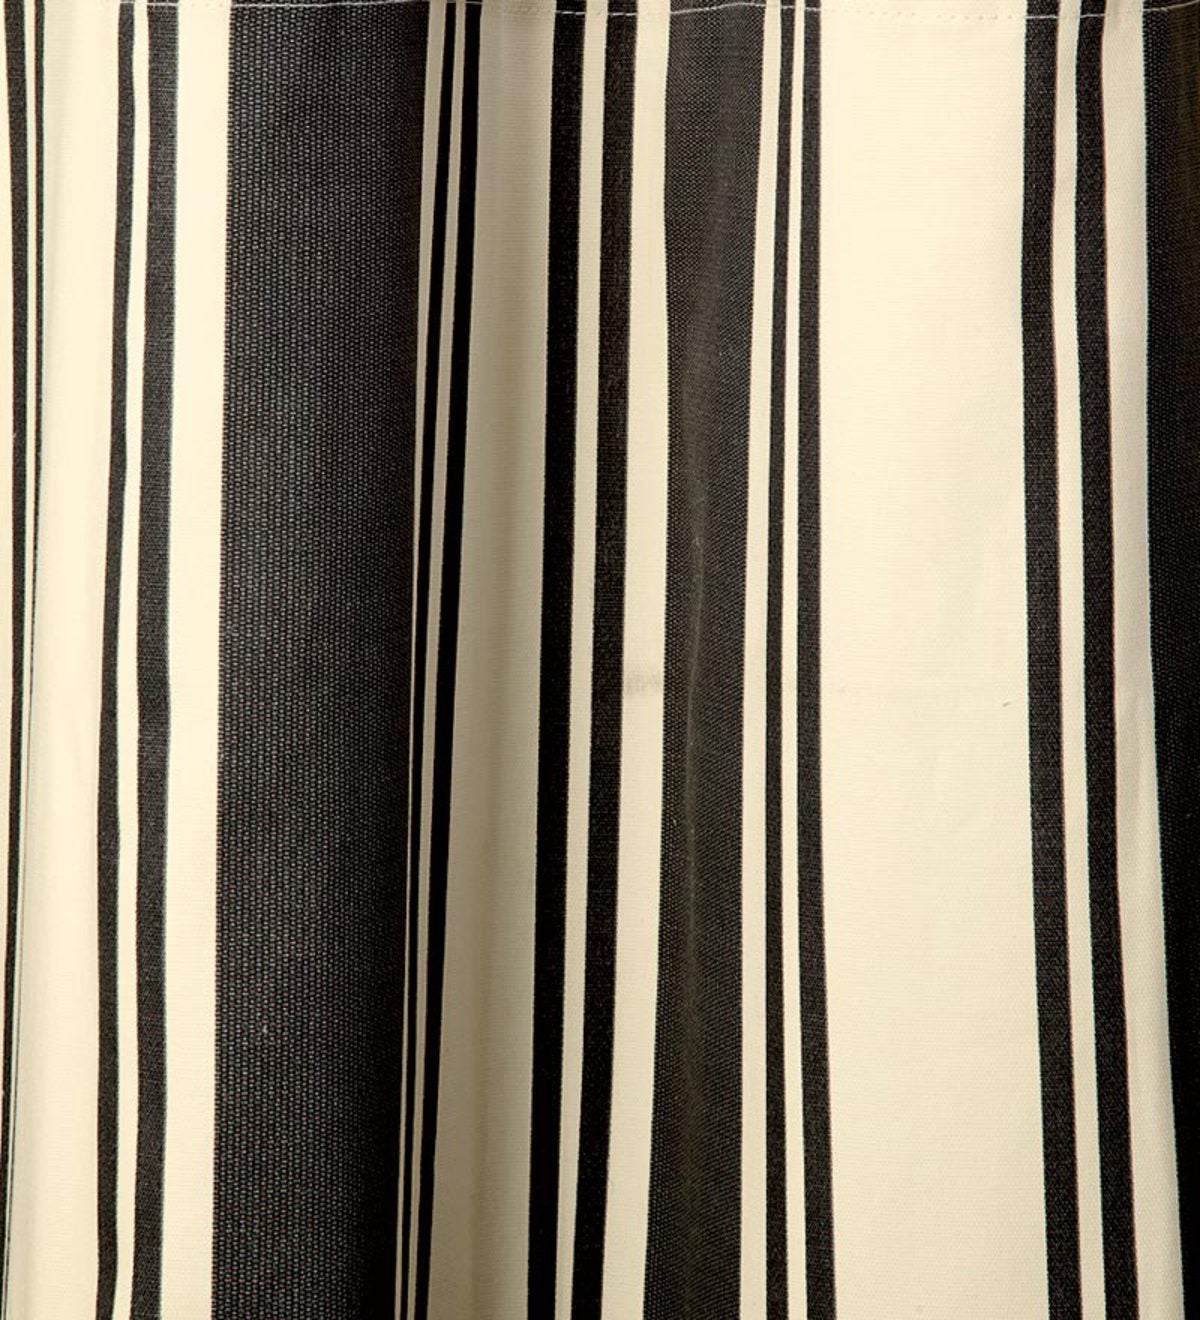 54”L Wide Stripe Grommet-Top Insulated Curtains - Black